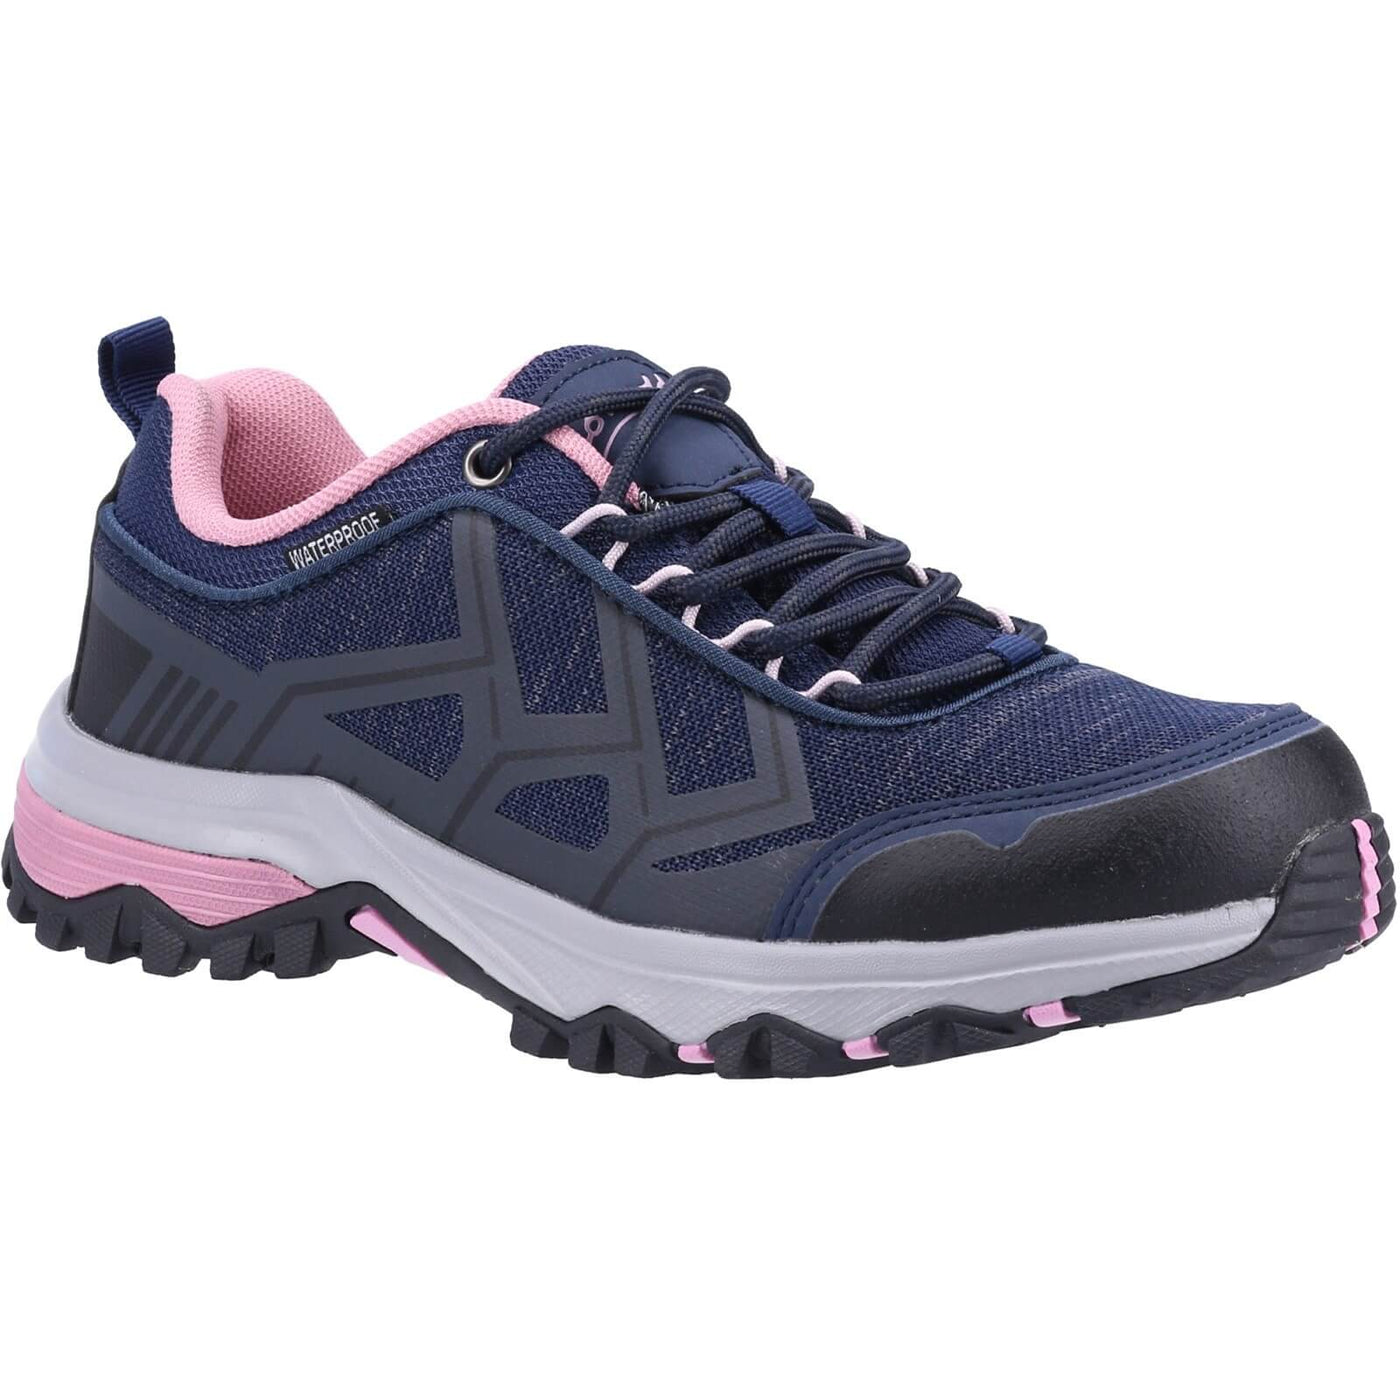 Cotswold Wychwood Low Waterproof Walking Shoes Navy/Pink 1#colour_navy-pink